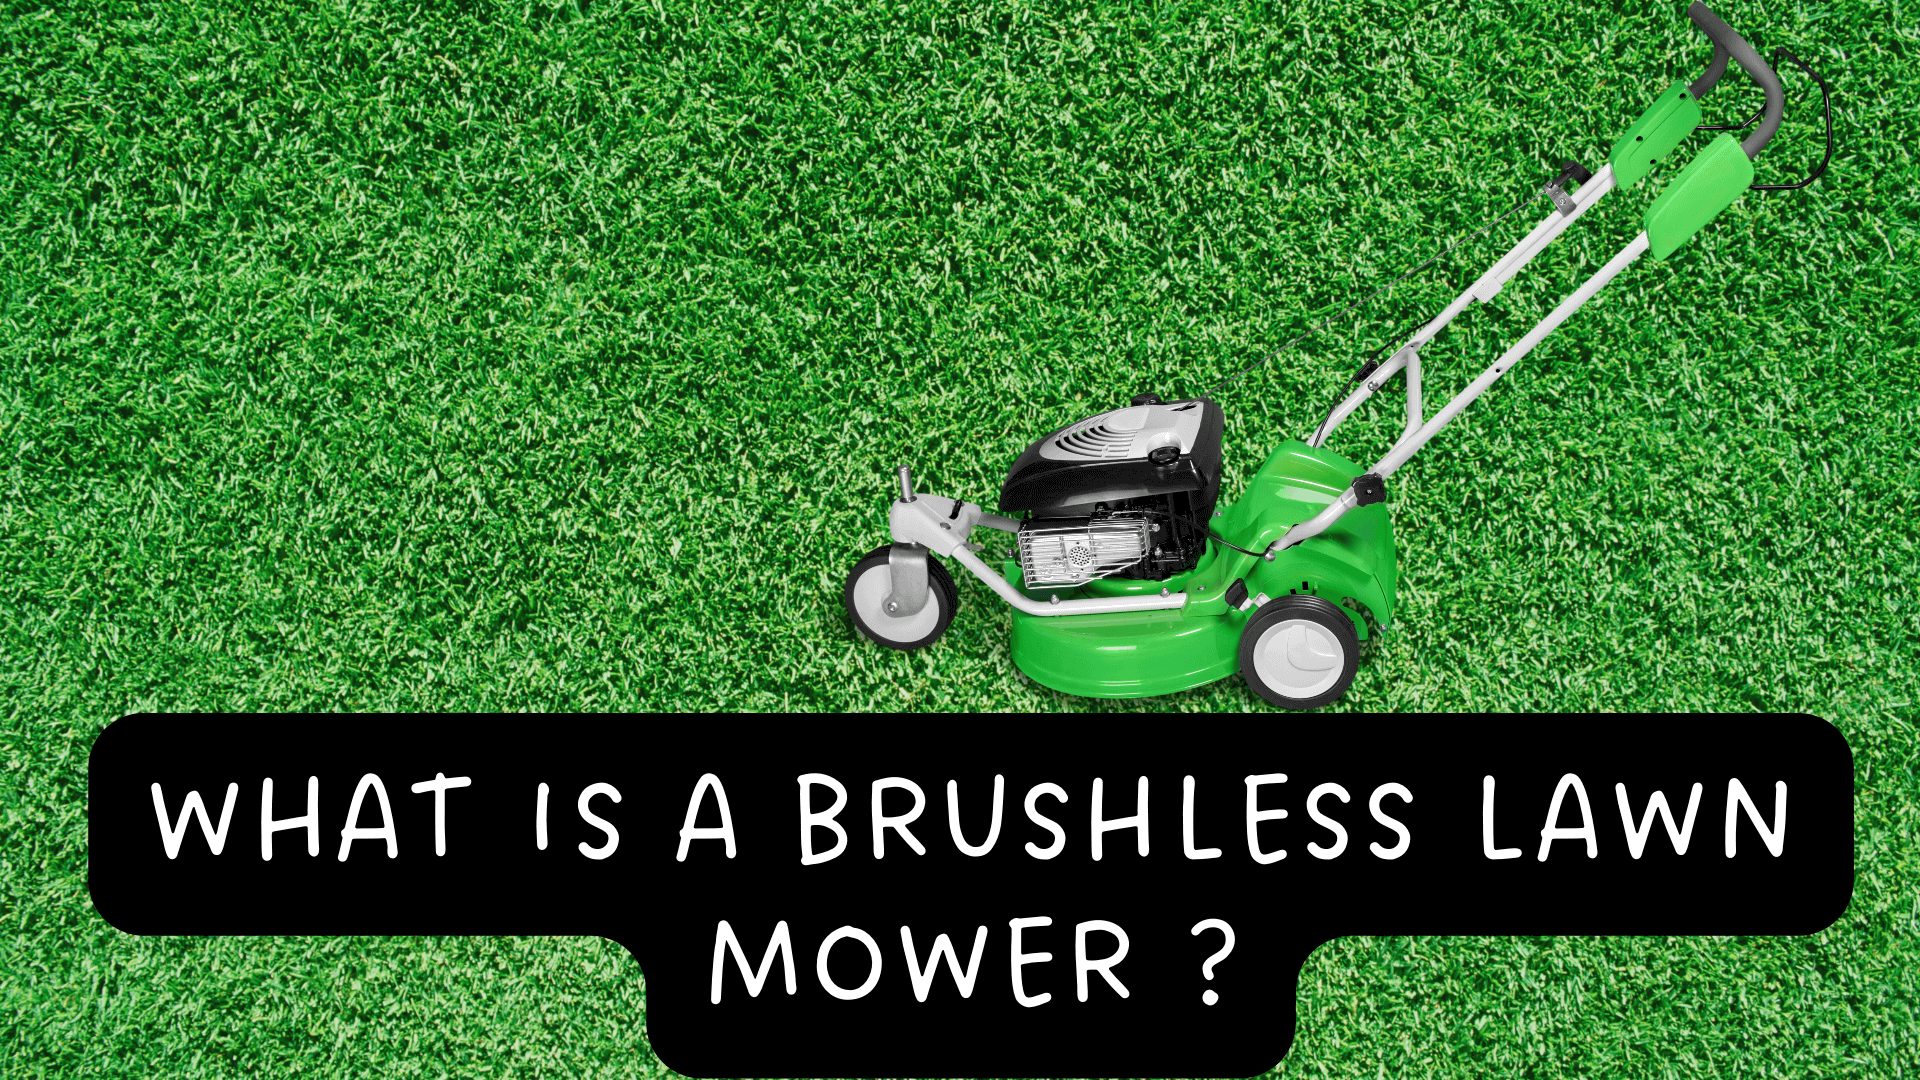 What Is A Brushless Lawn Mower?